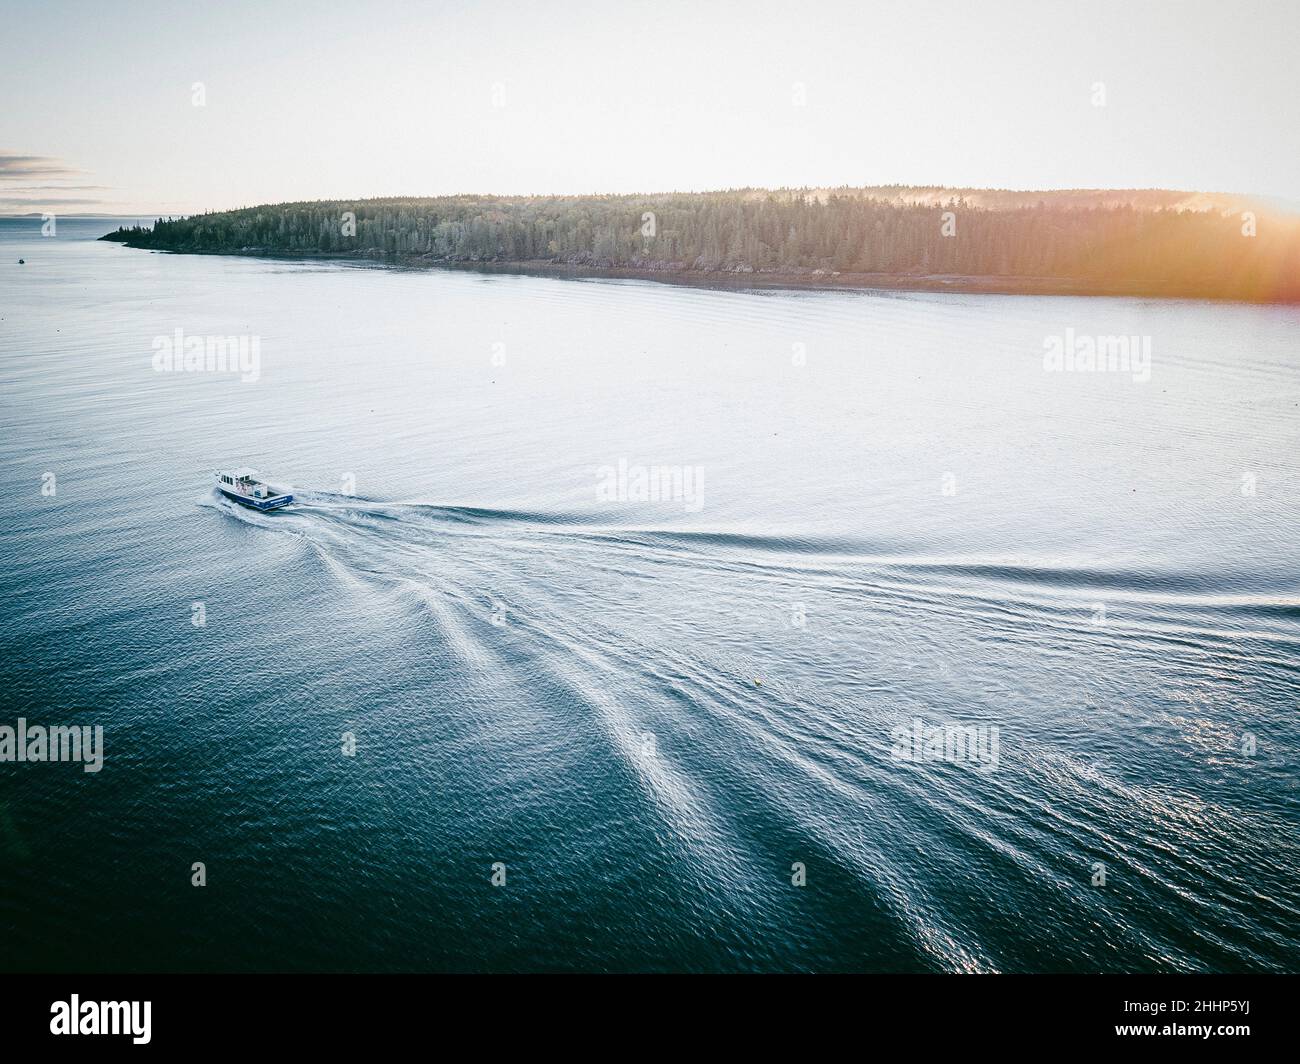 Aerial view of a fishing boat driving in the sea, in Owl's Head, Maine Stock Photo